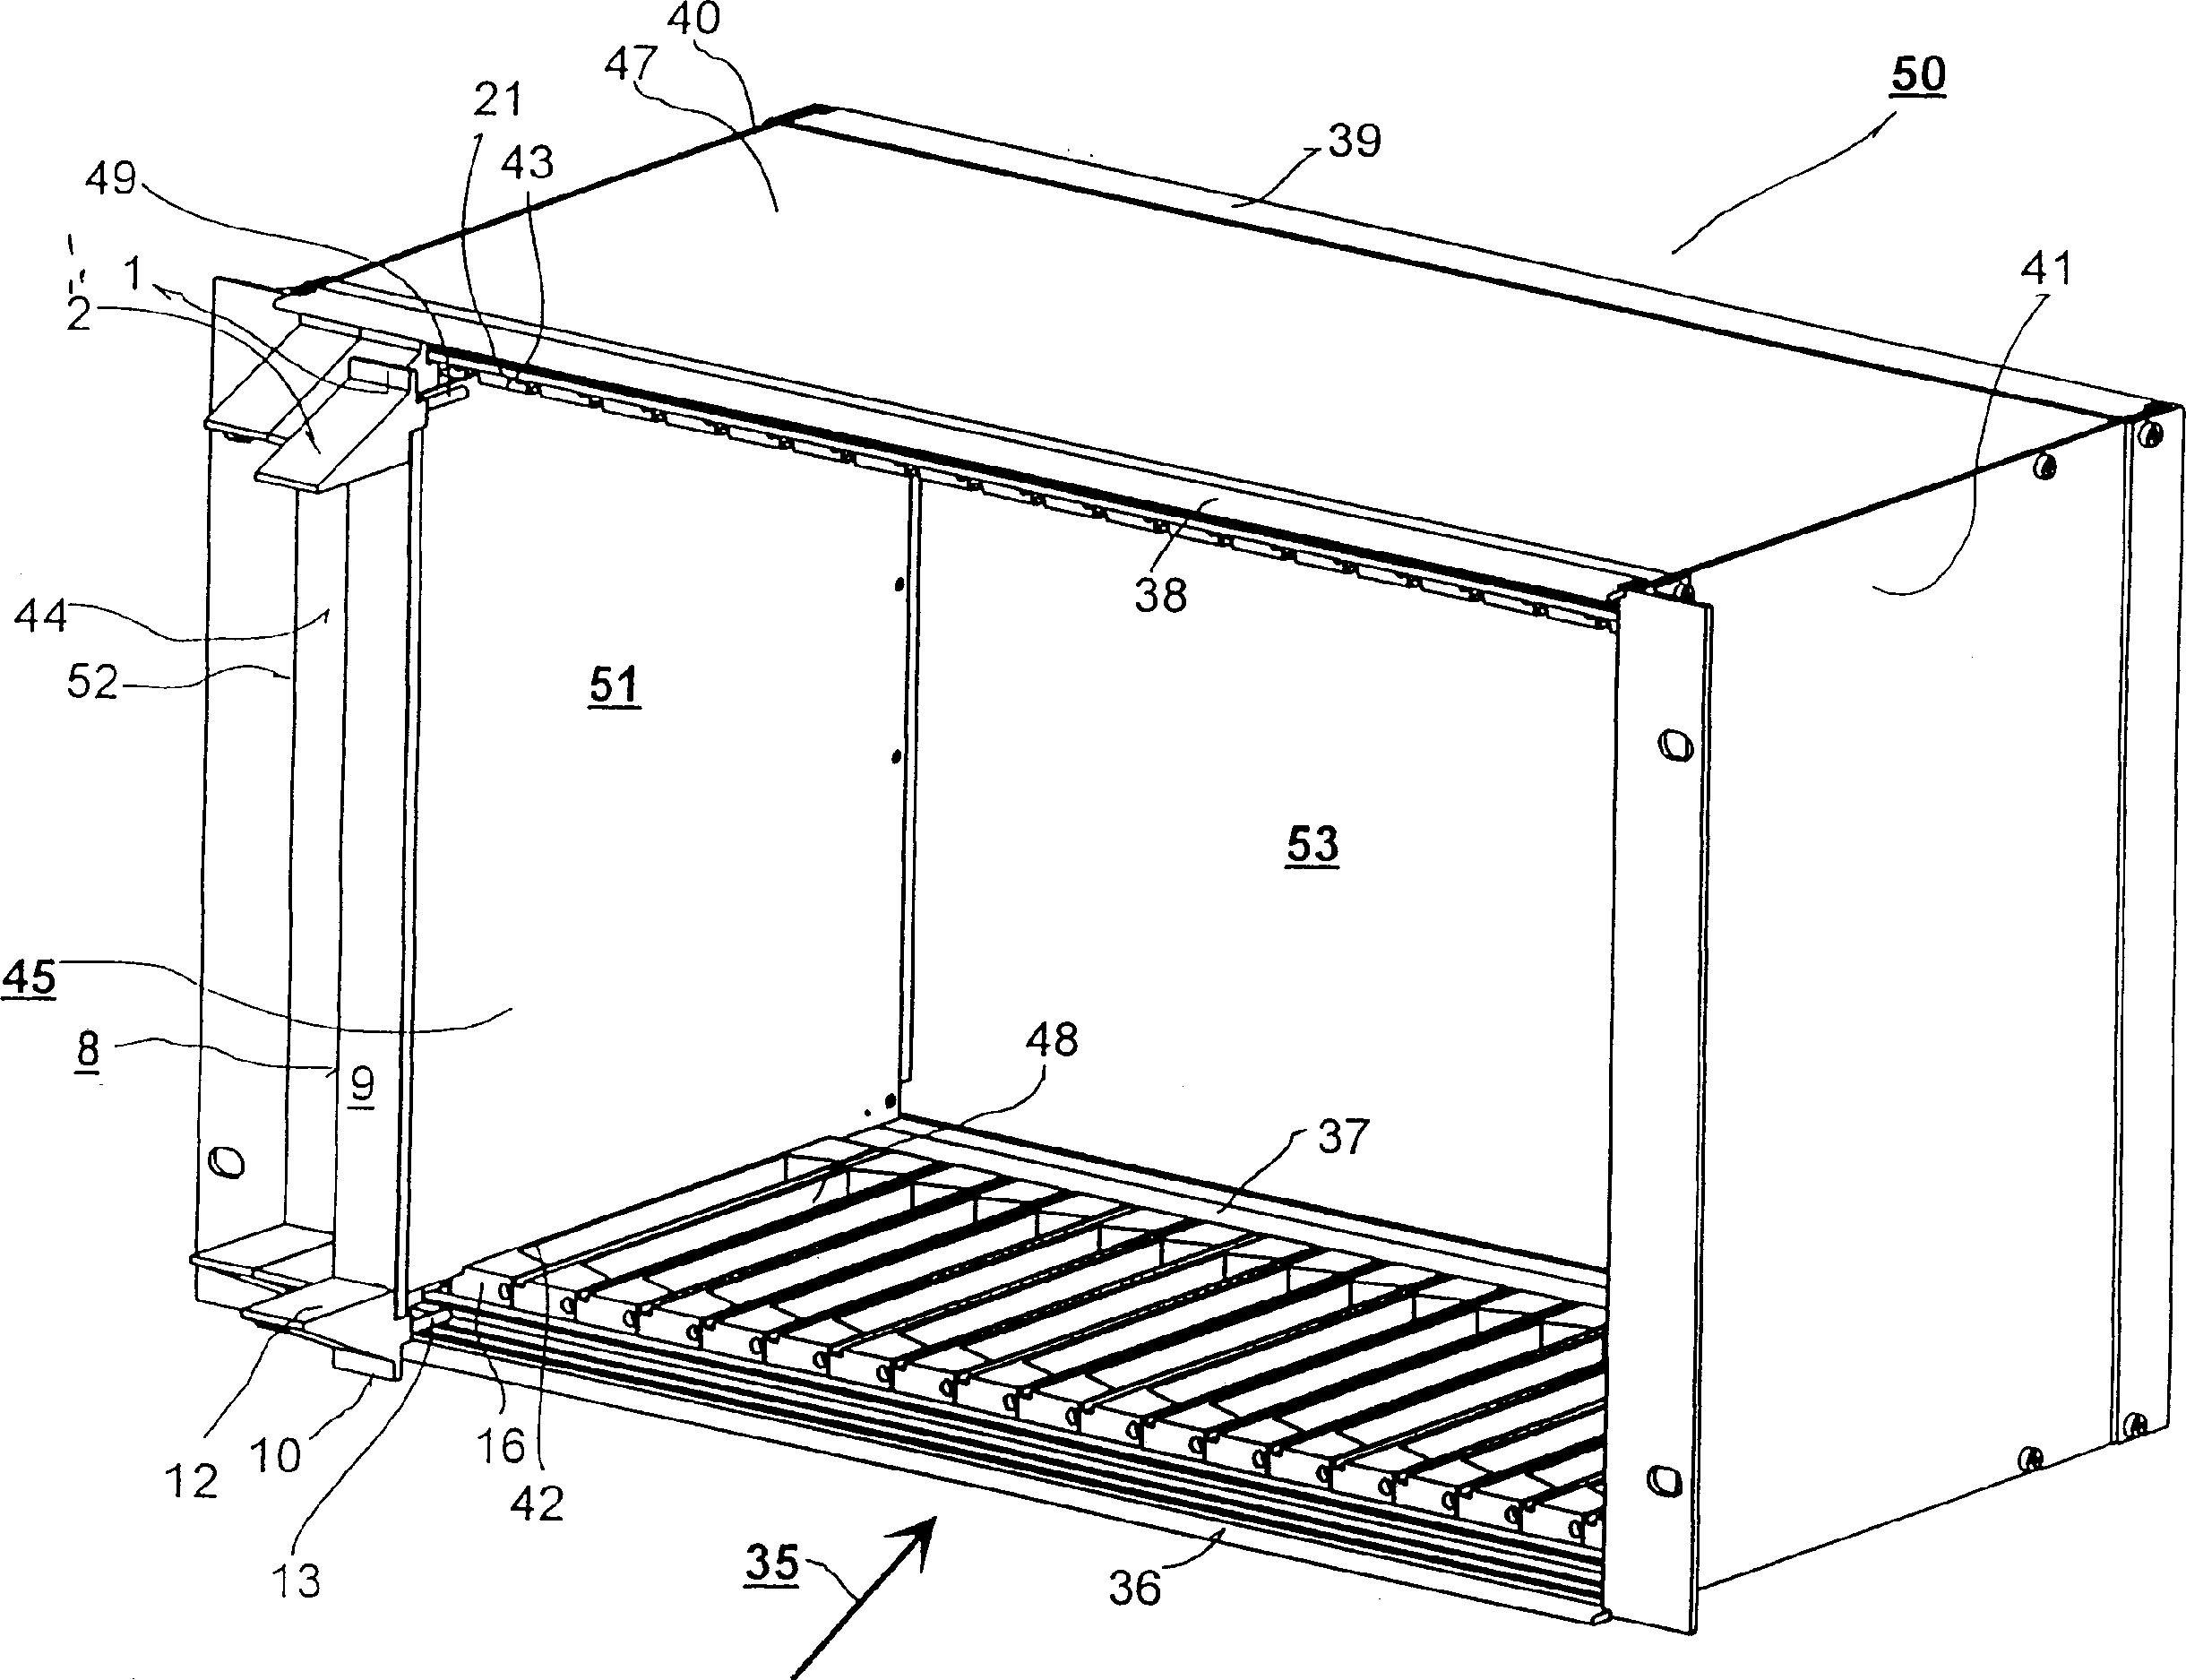 Rack system for inserting electrical printed circuit boards